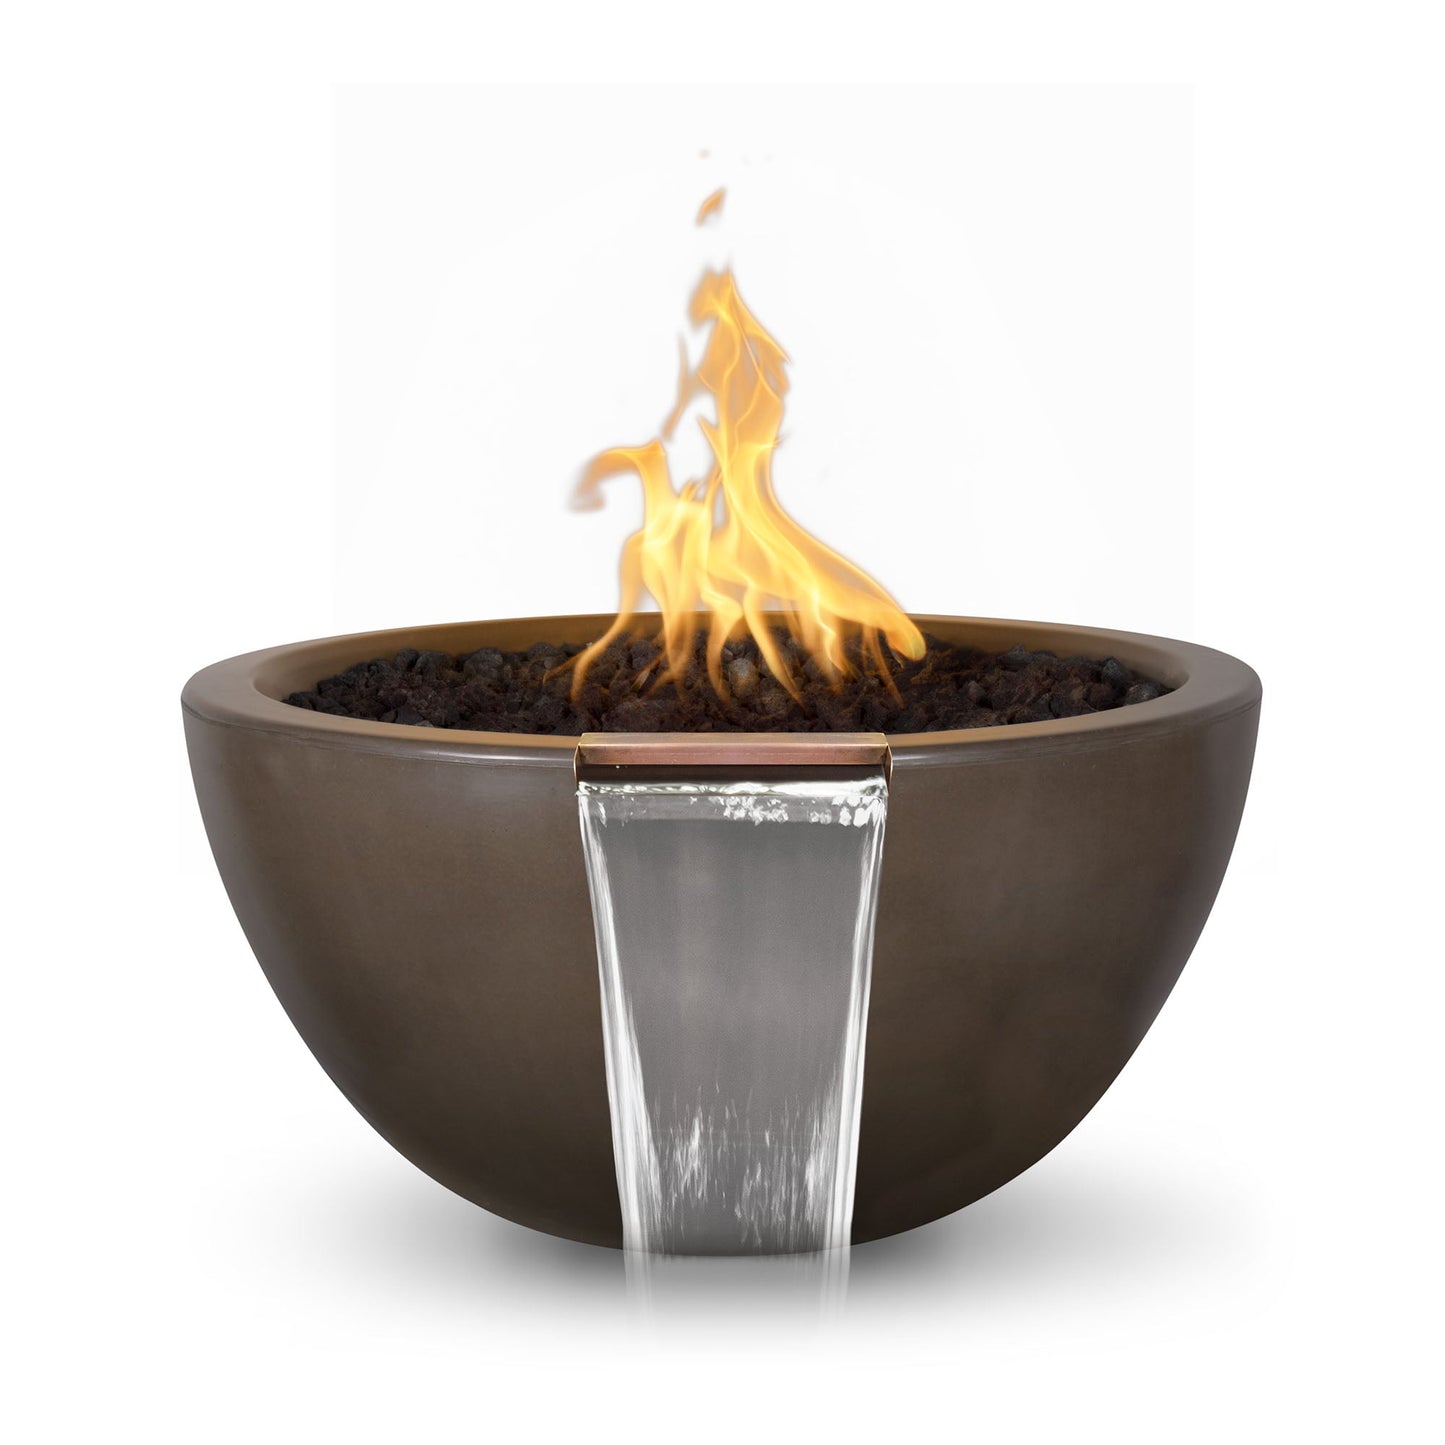 The Outdoor Plus Round Luna 30" Black GFRC Concrete Natural Gas Fire & Water Bowl with Match Lit with Flame Sense Ignition